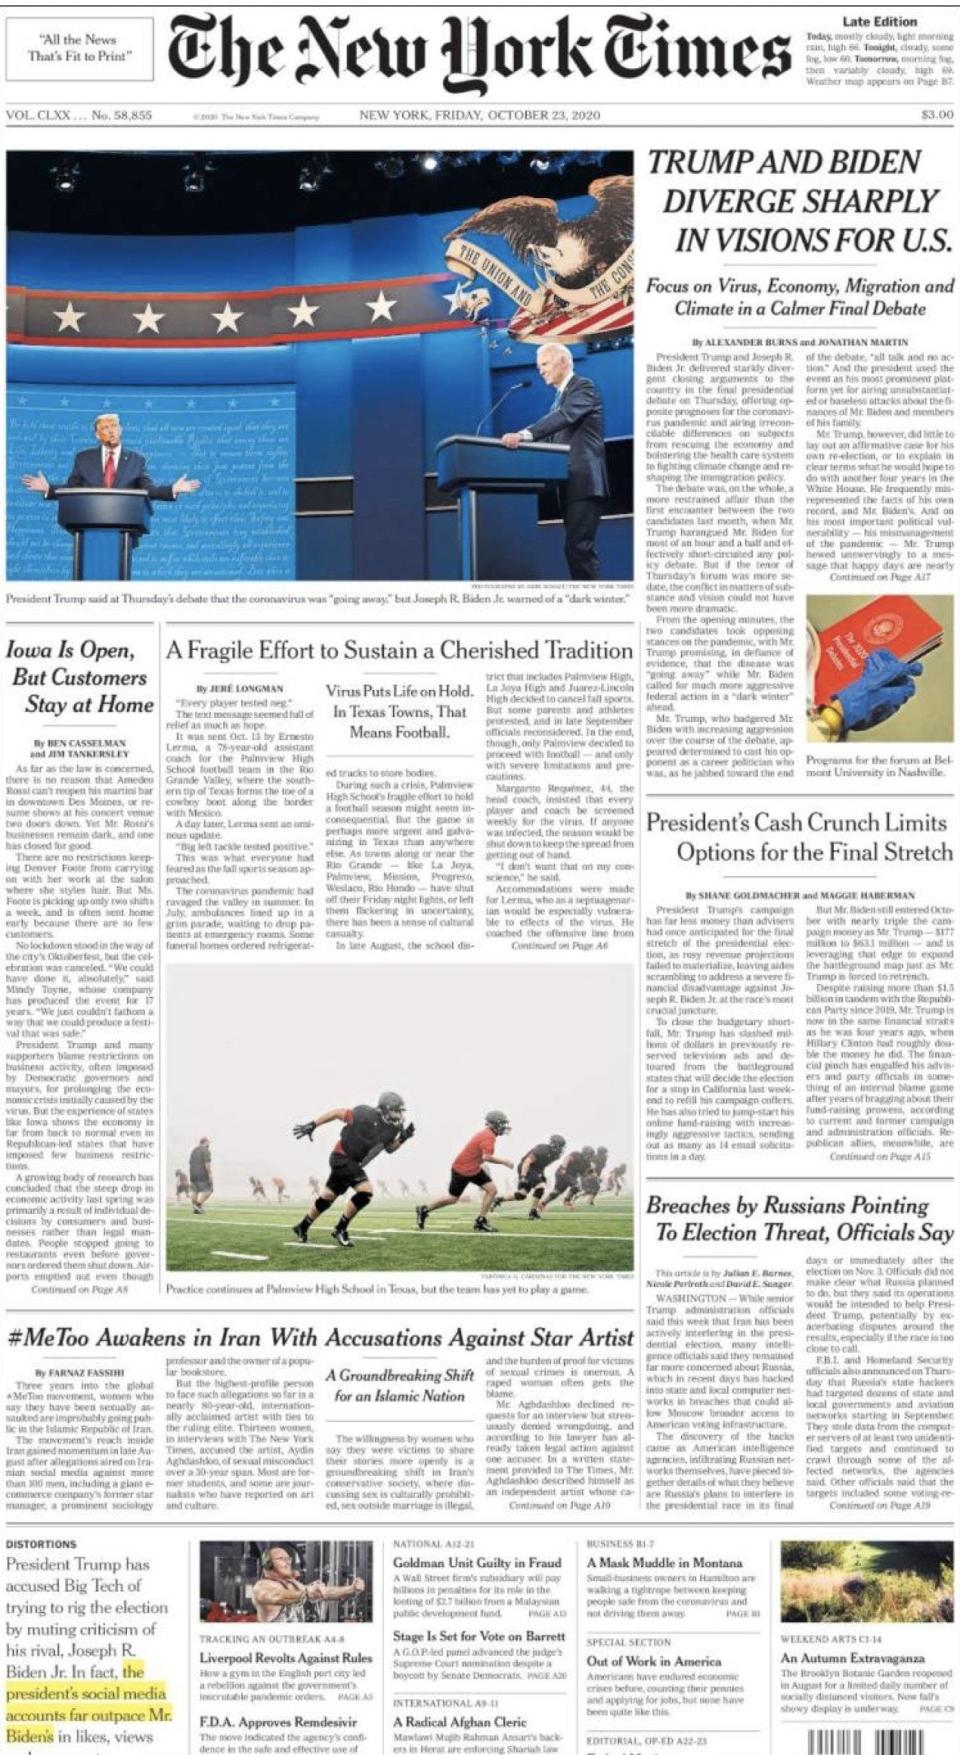 Friday's front page of the New York Times